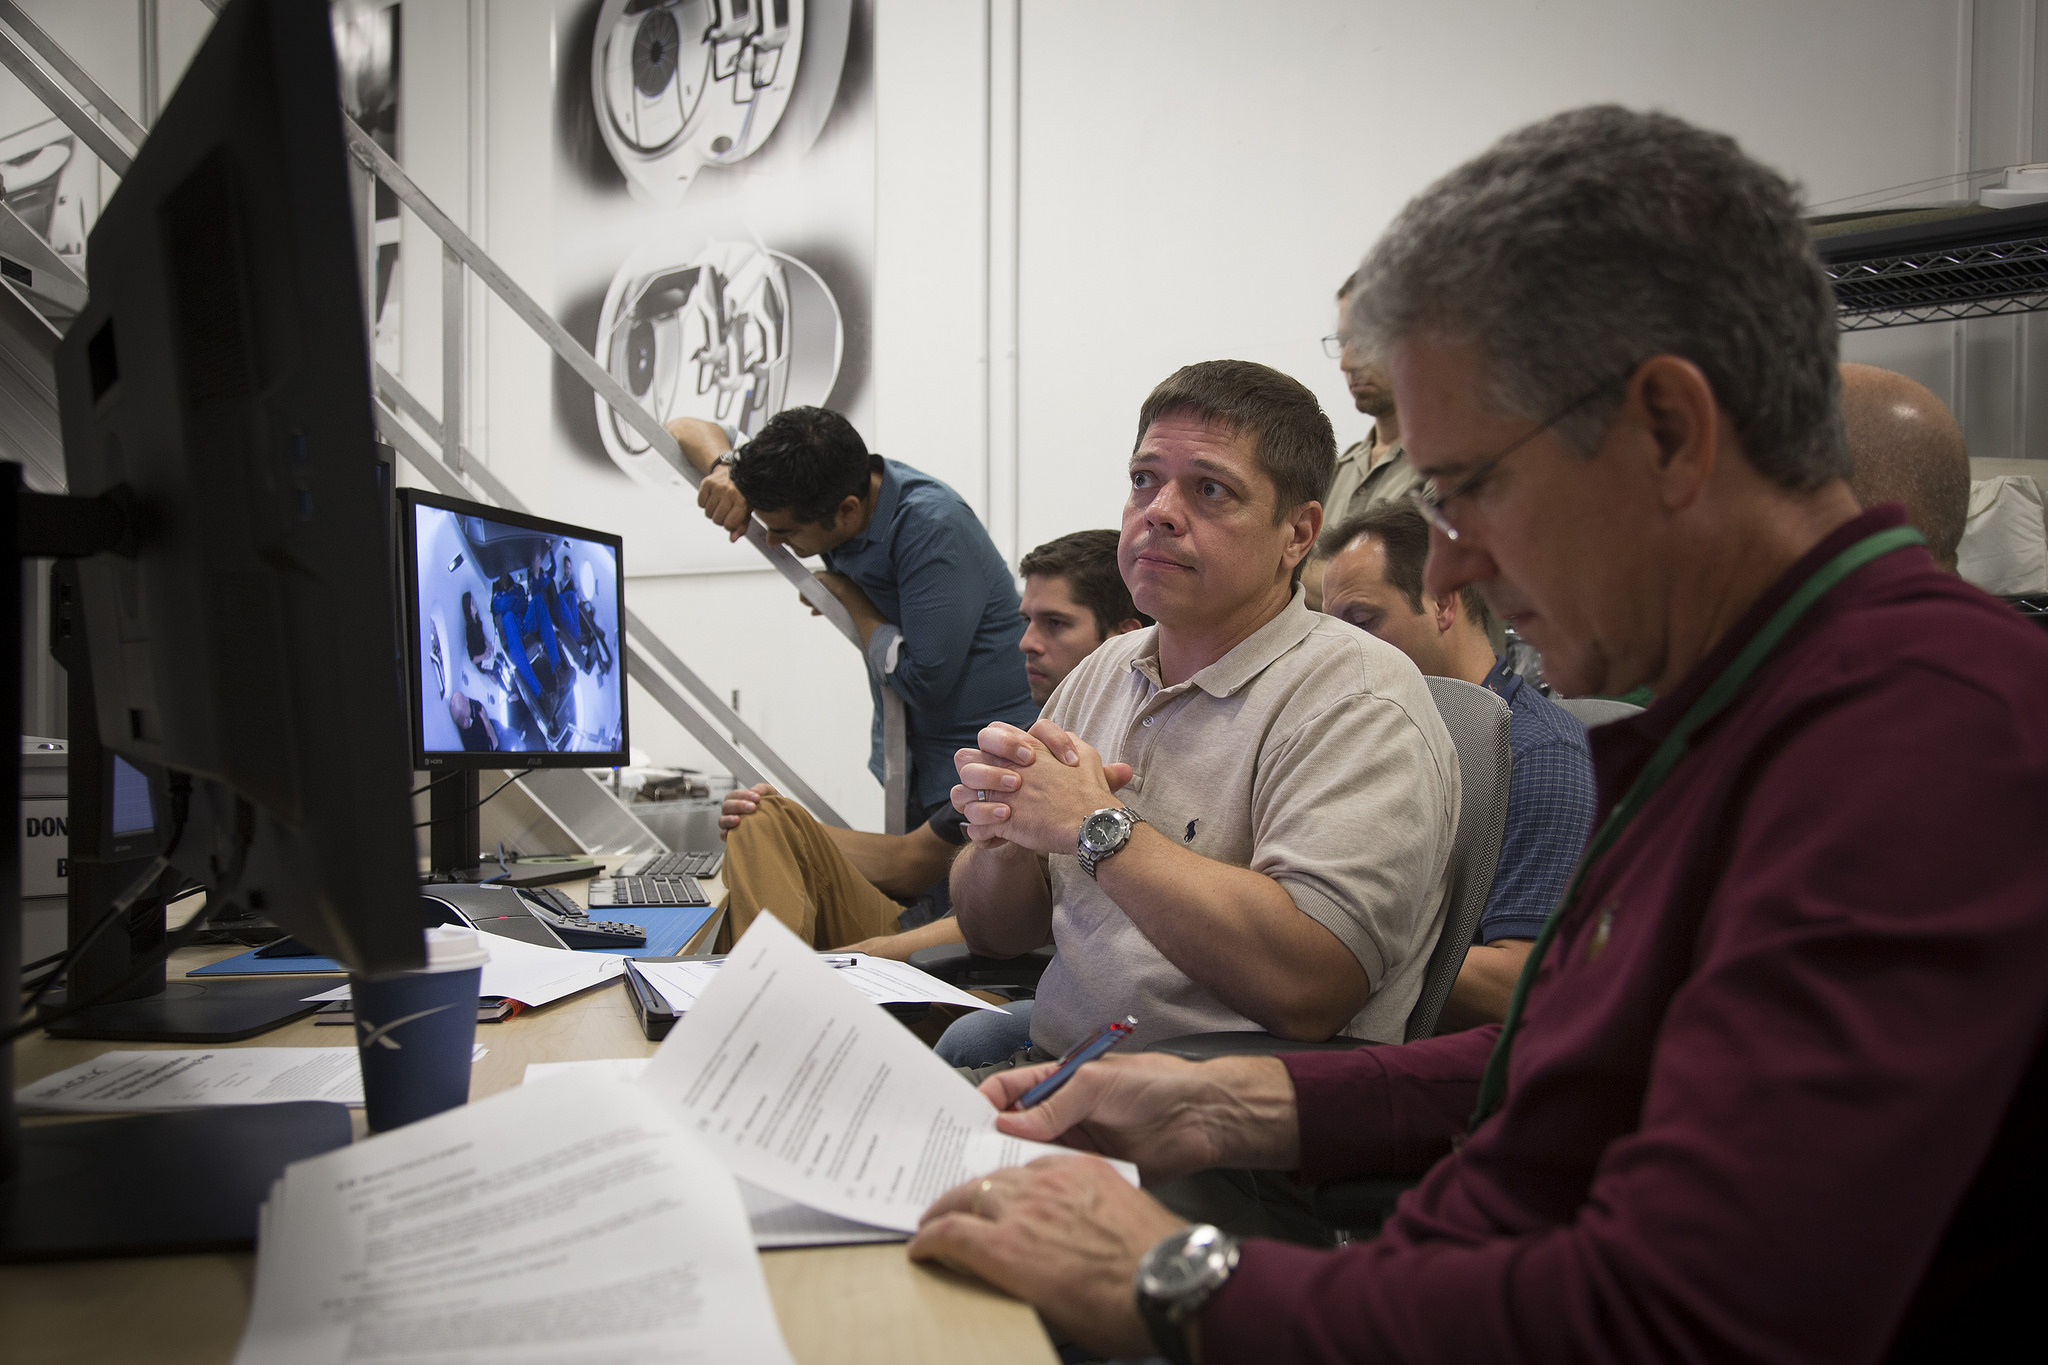 Commercial Crew astronaut Bob Behnken (center in beige shirt) watches monitors during an evaluation visit for the Crew Dragon spacecraft at SpaceX's Hawthorne, California, headquarters as astronaut Mike Good, right, looks on. Photo Credit: SpaceX